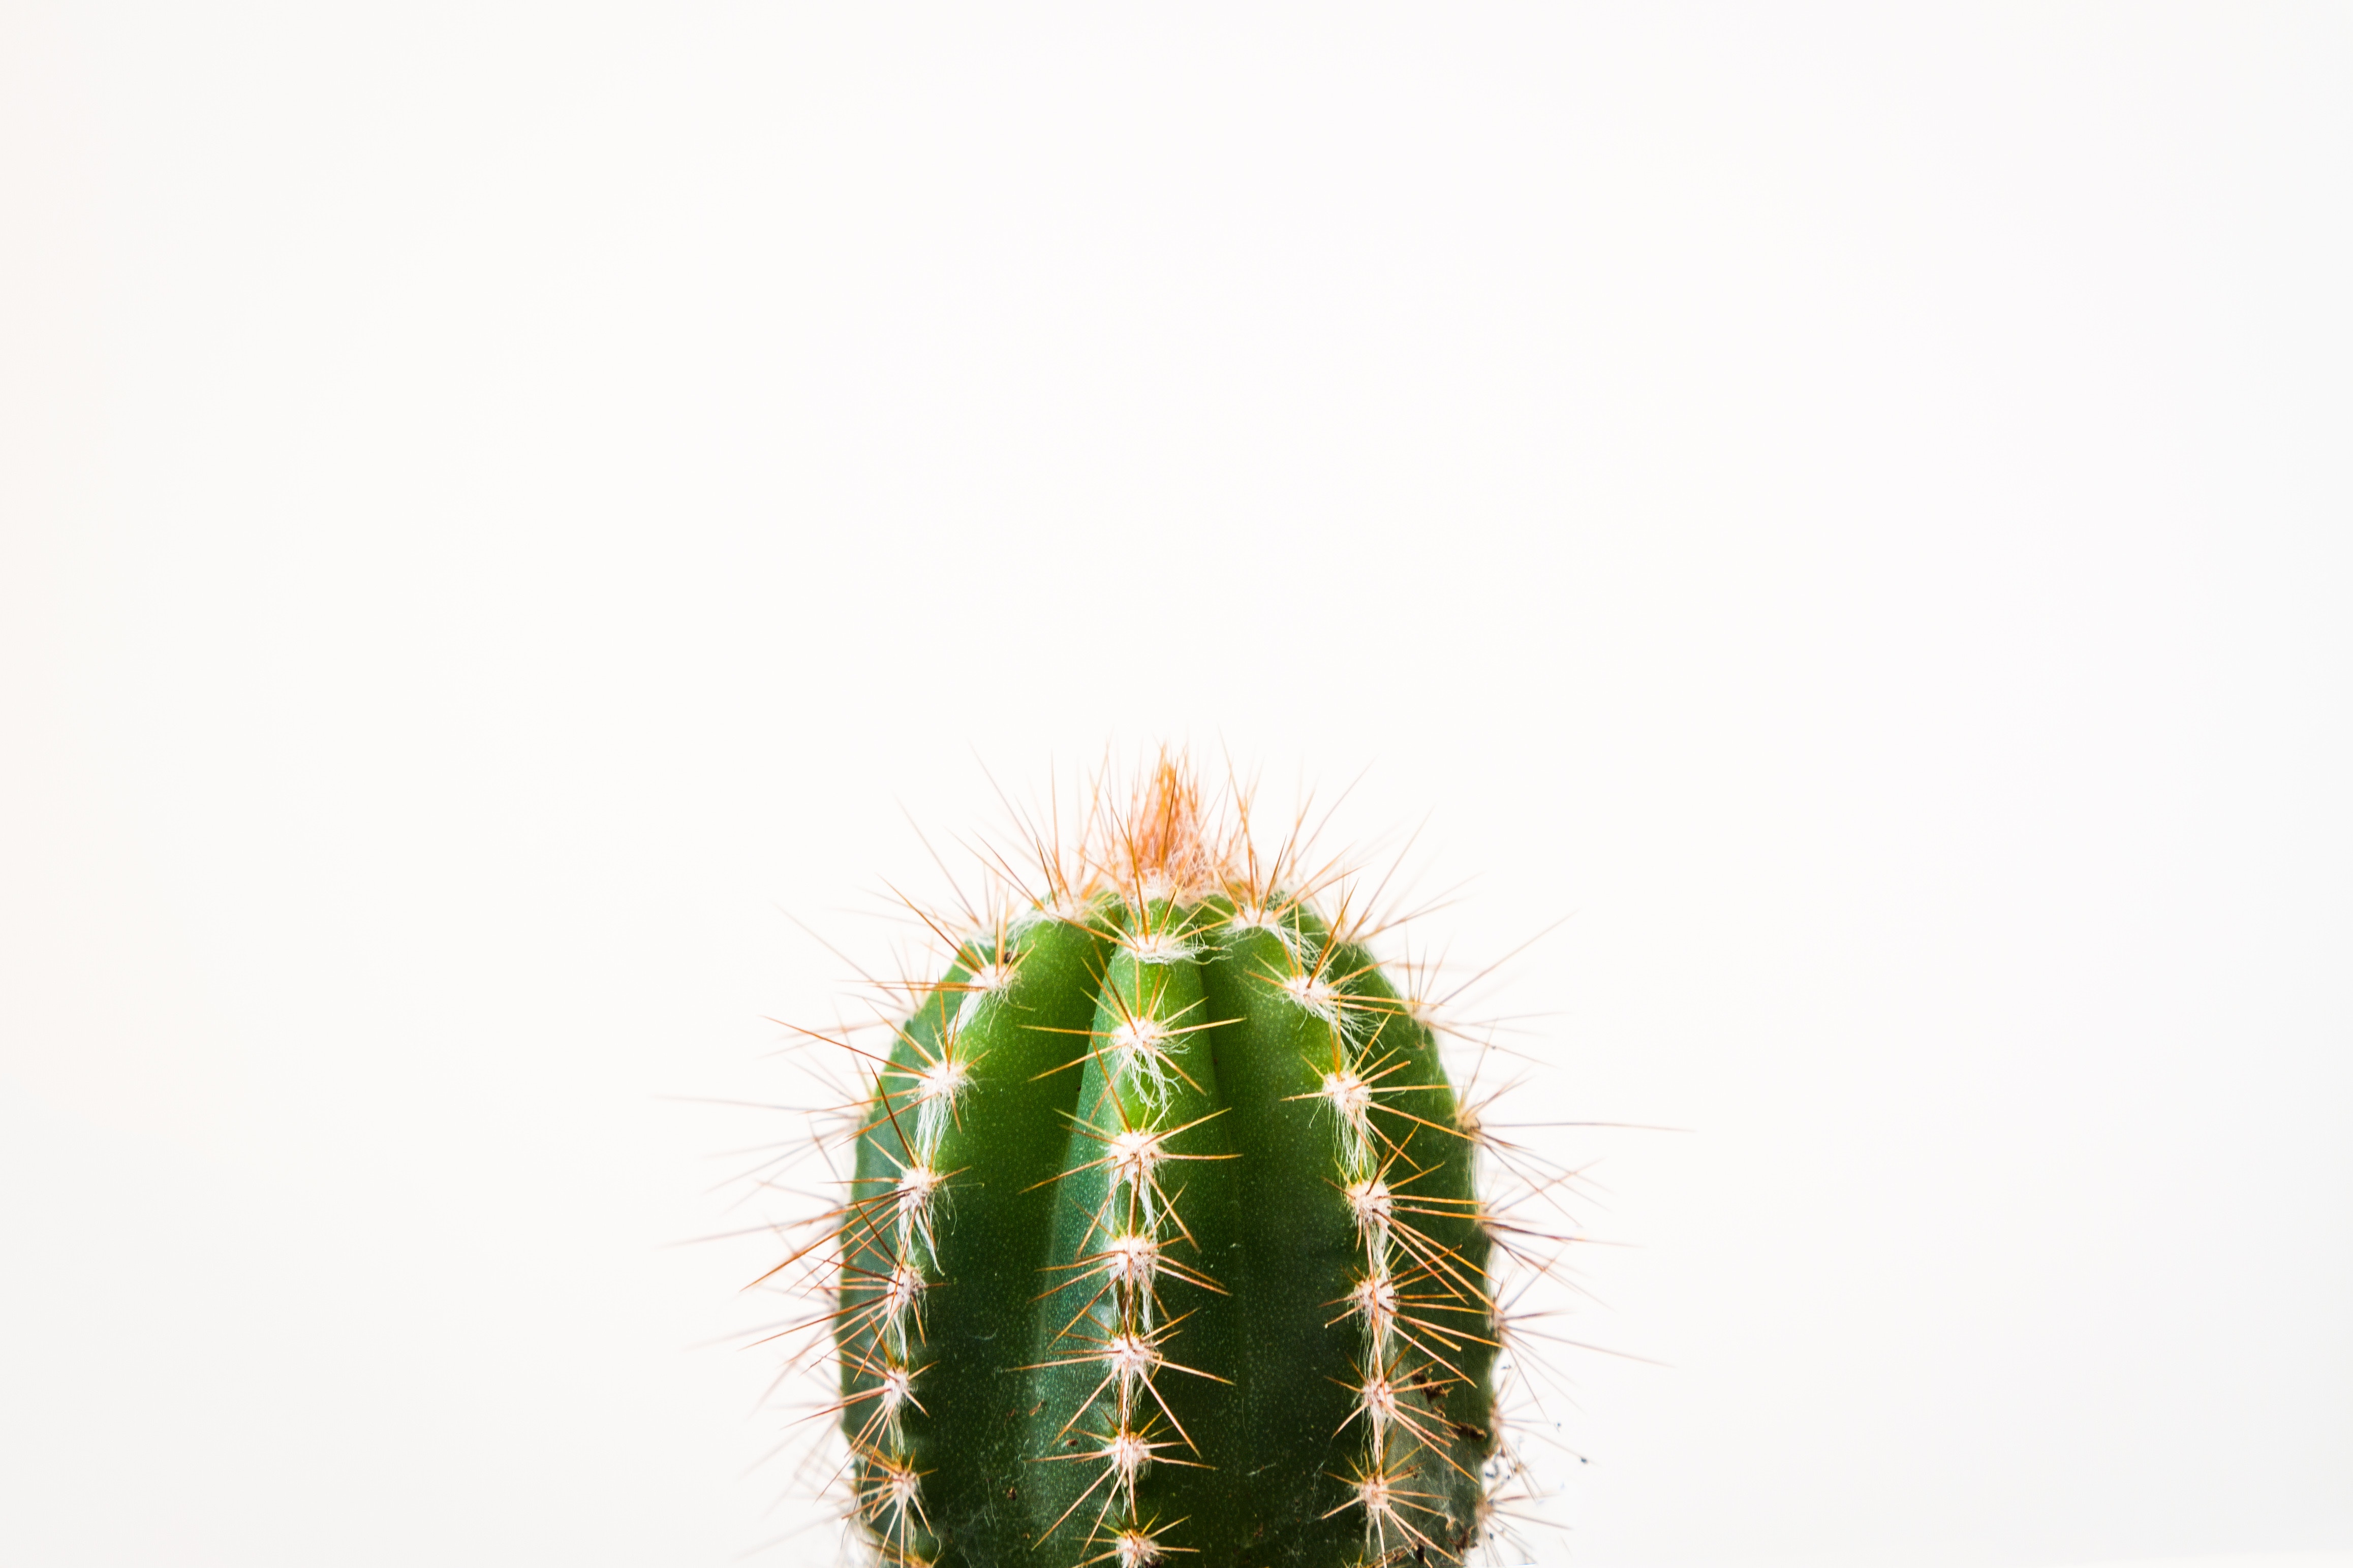 cactus in front of a white background